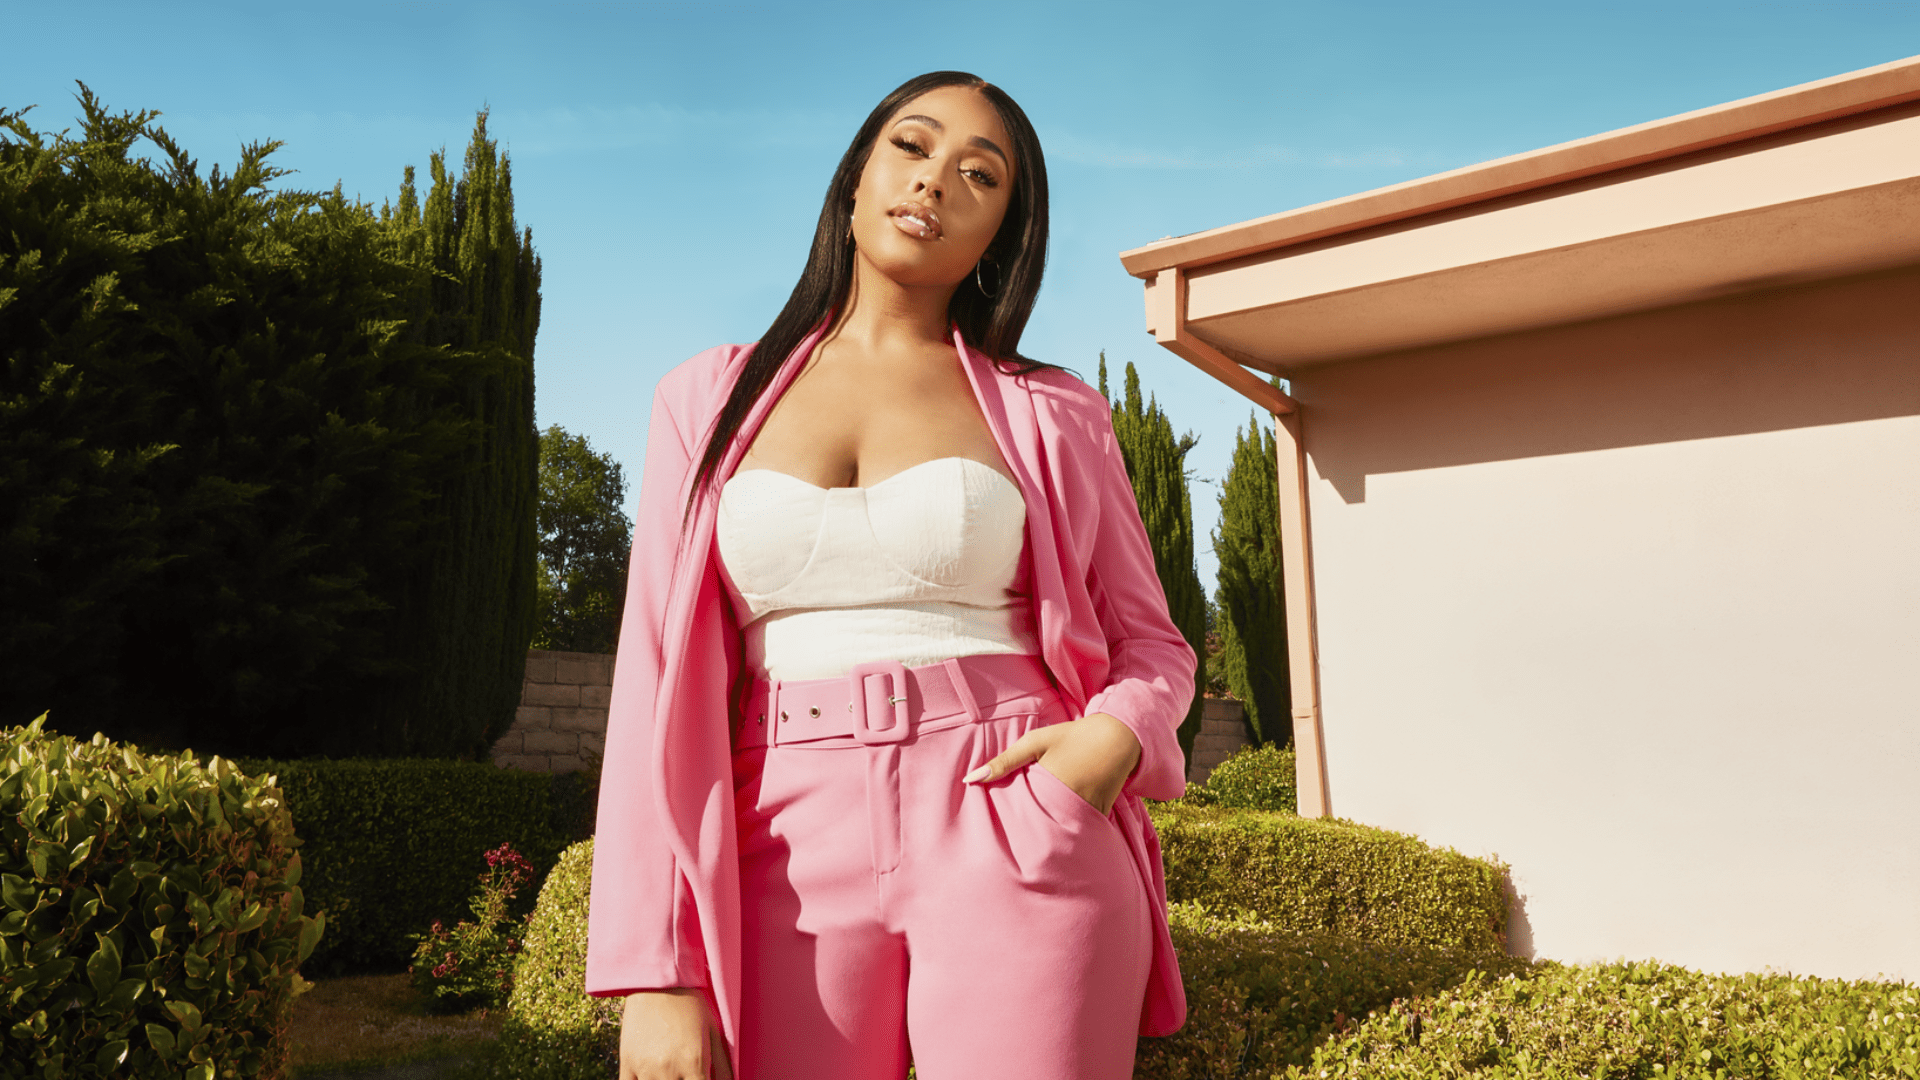 Jordyn Woods Shows Off Her Juicy Curves In This Revealing Outfit - Check Out The Pics Here